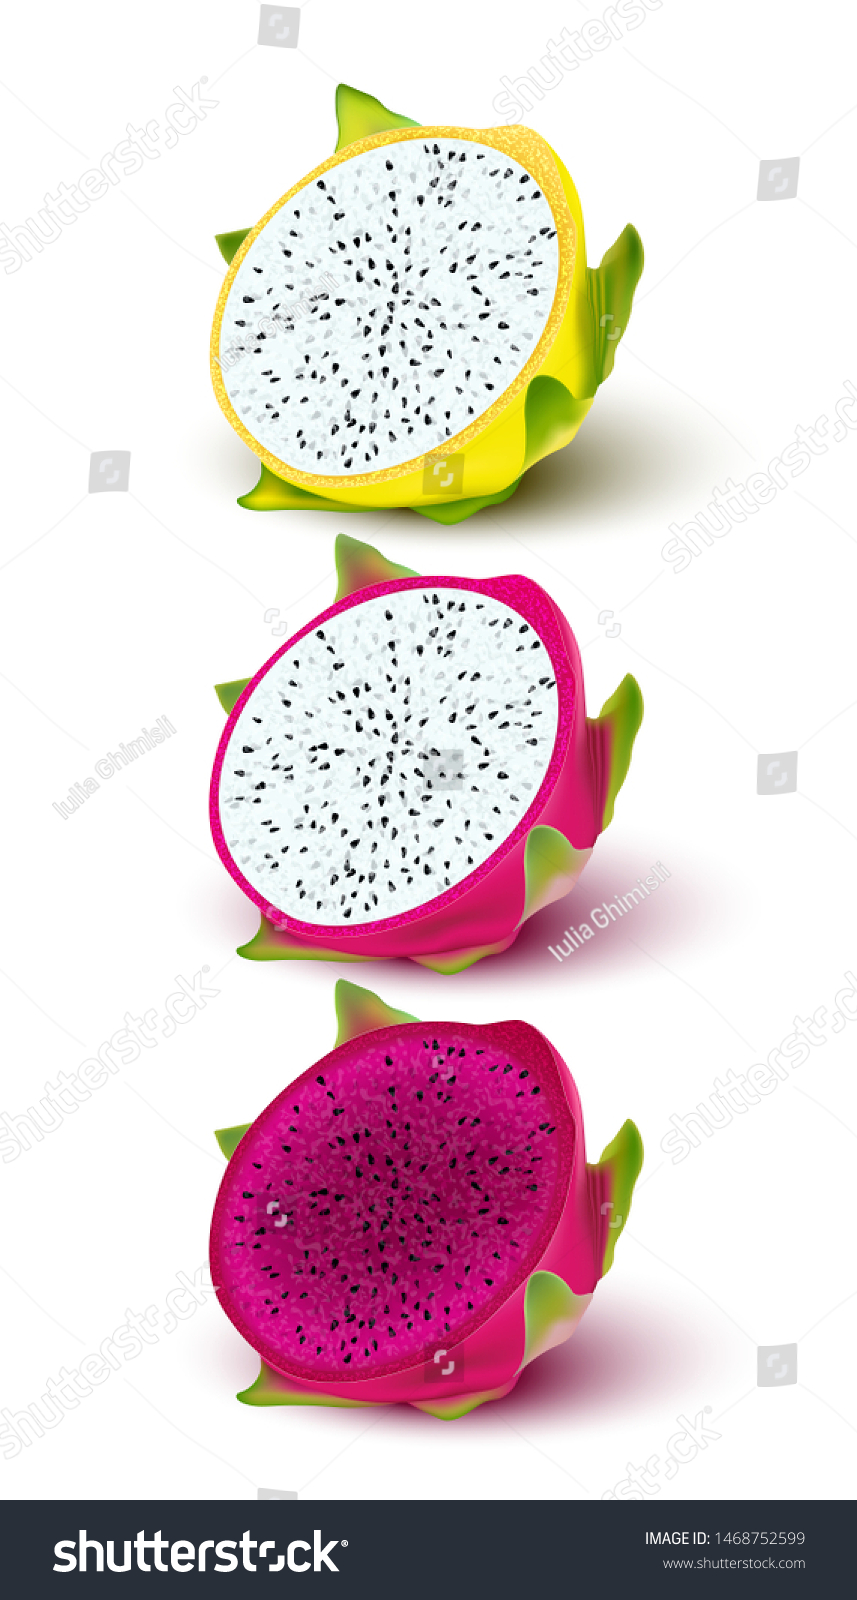 Red Yellow Dragon Fruit Whole Fruit Stock Vector Royalty Free 1468752599,Vols Animal